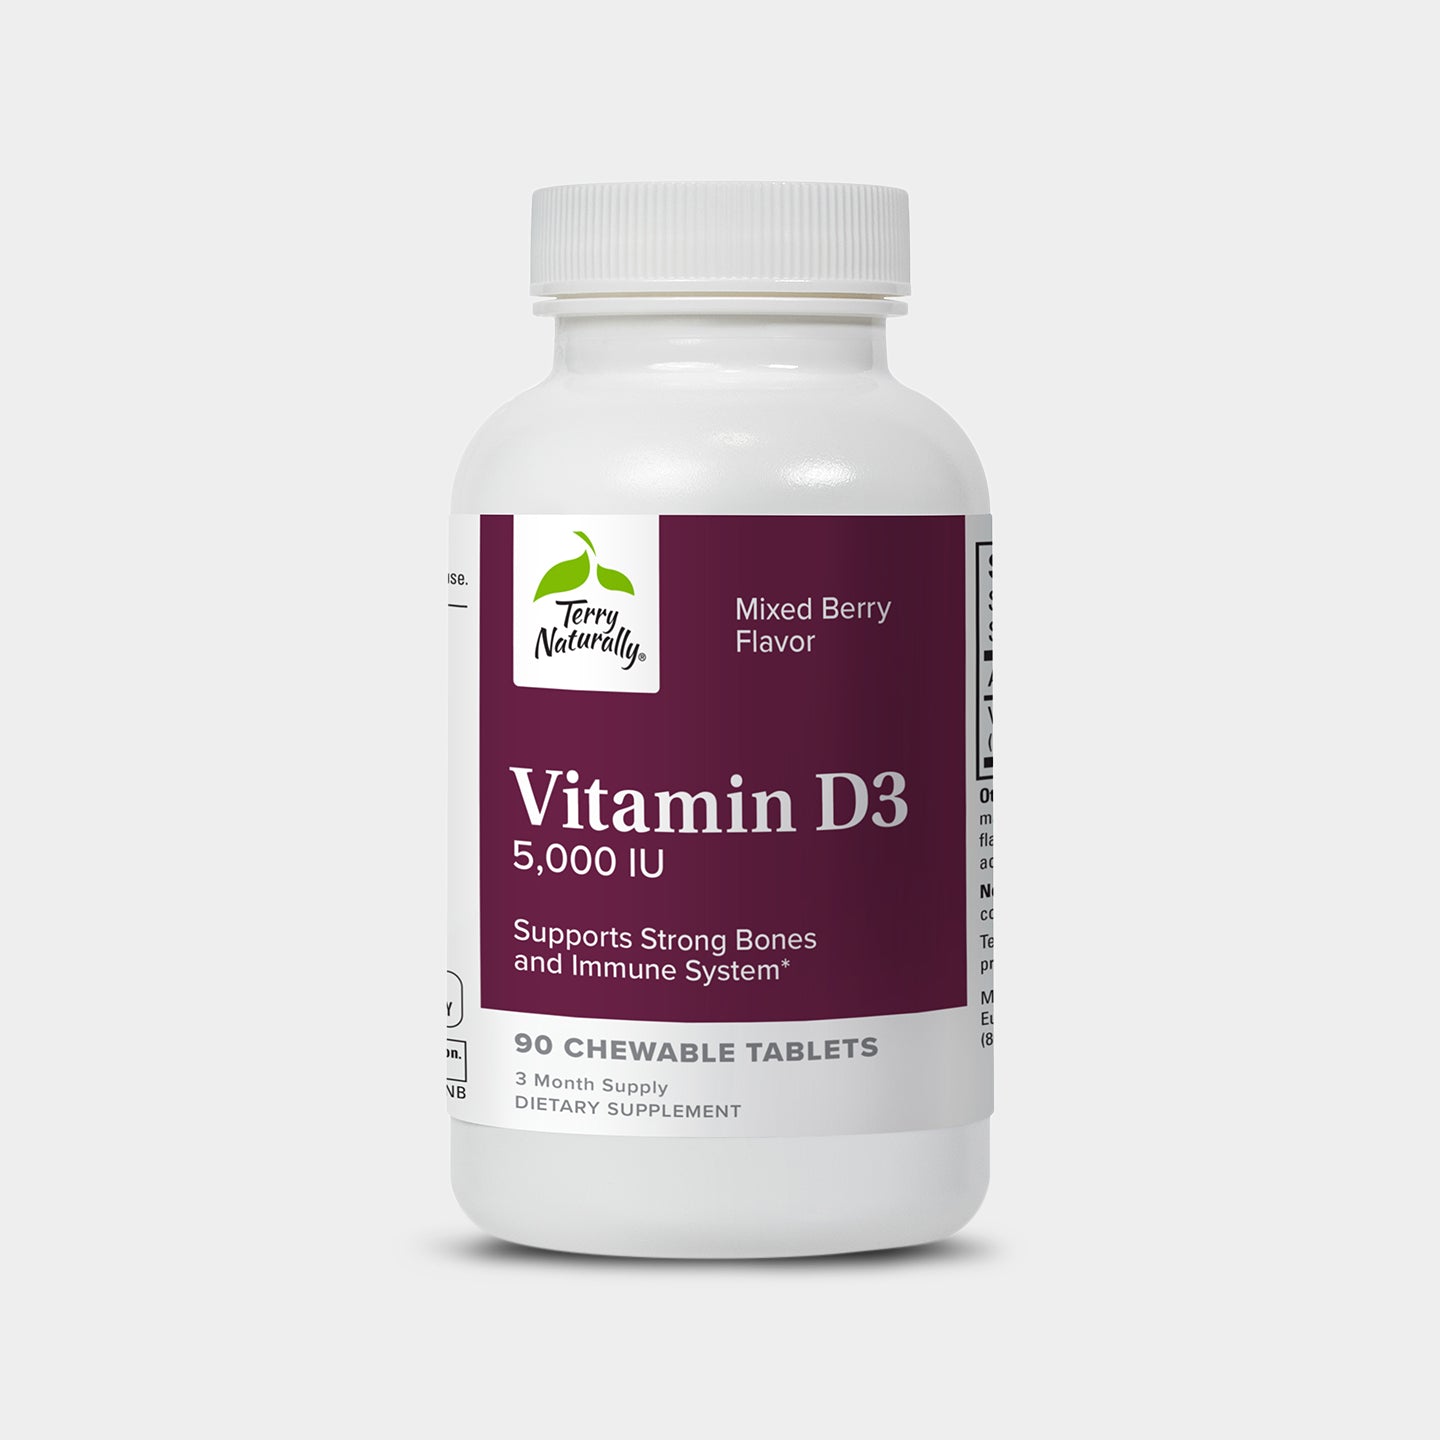 Terry Naturally Vitamin D3 Chewable Vitamin A1